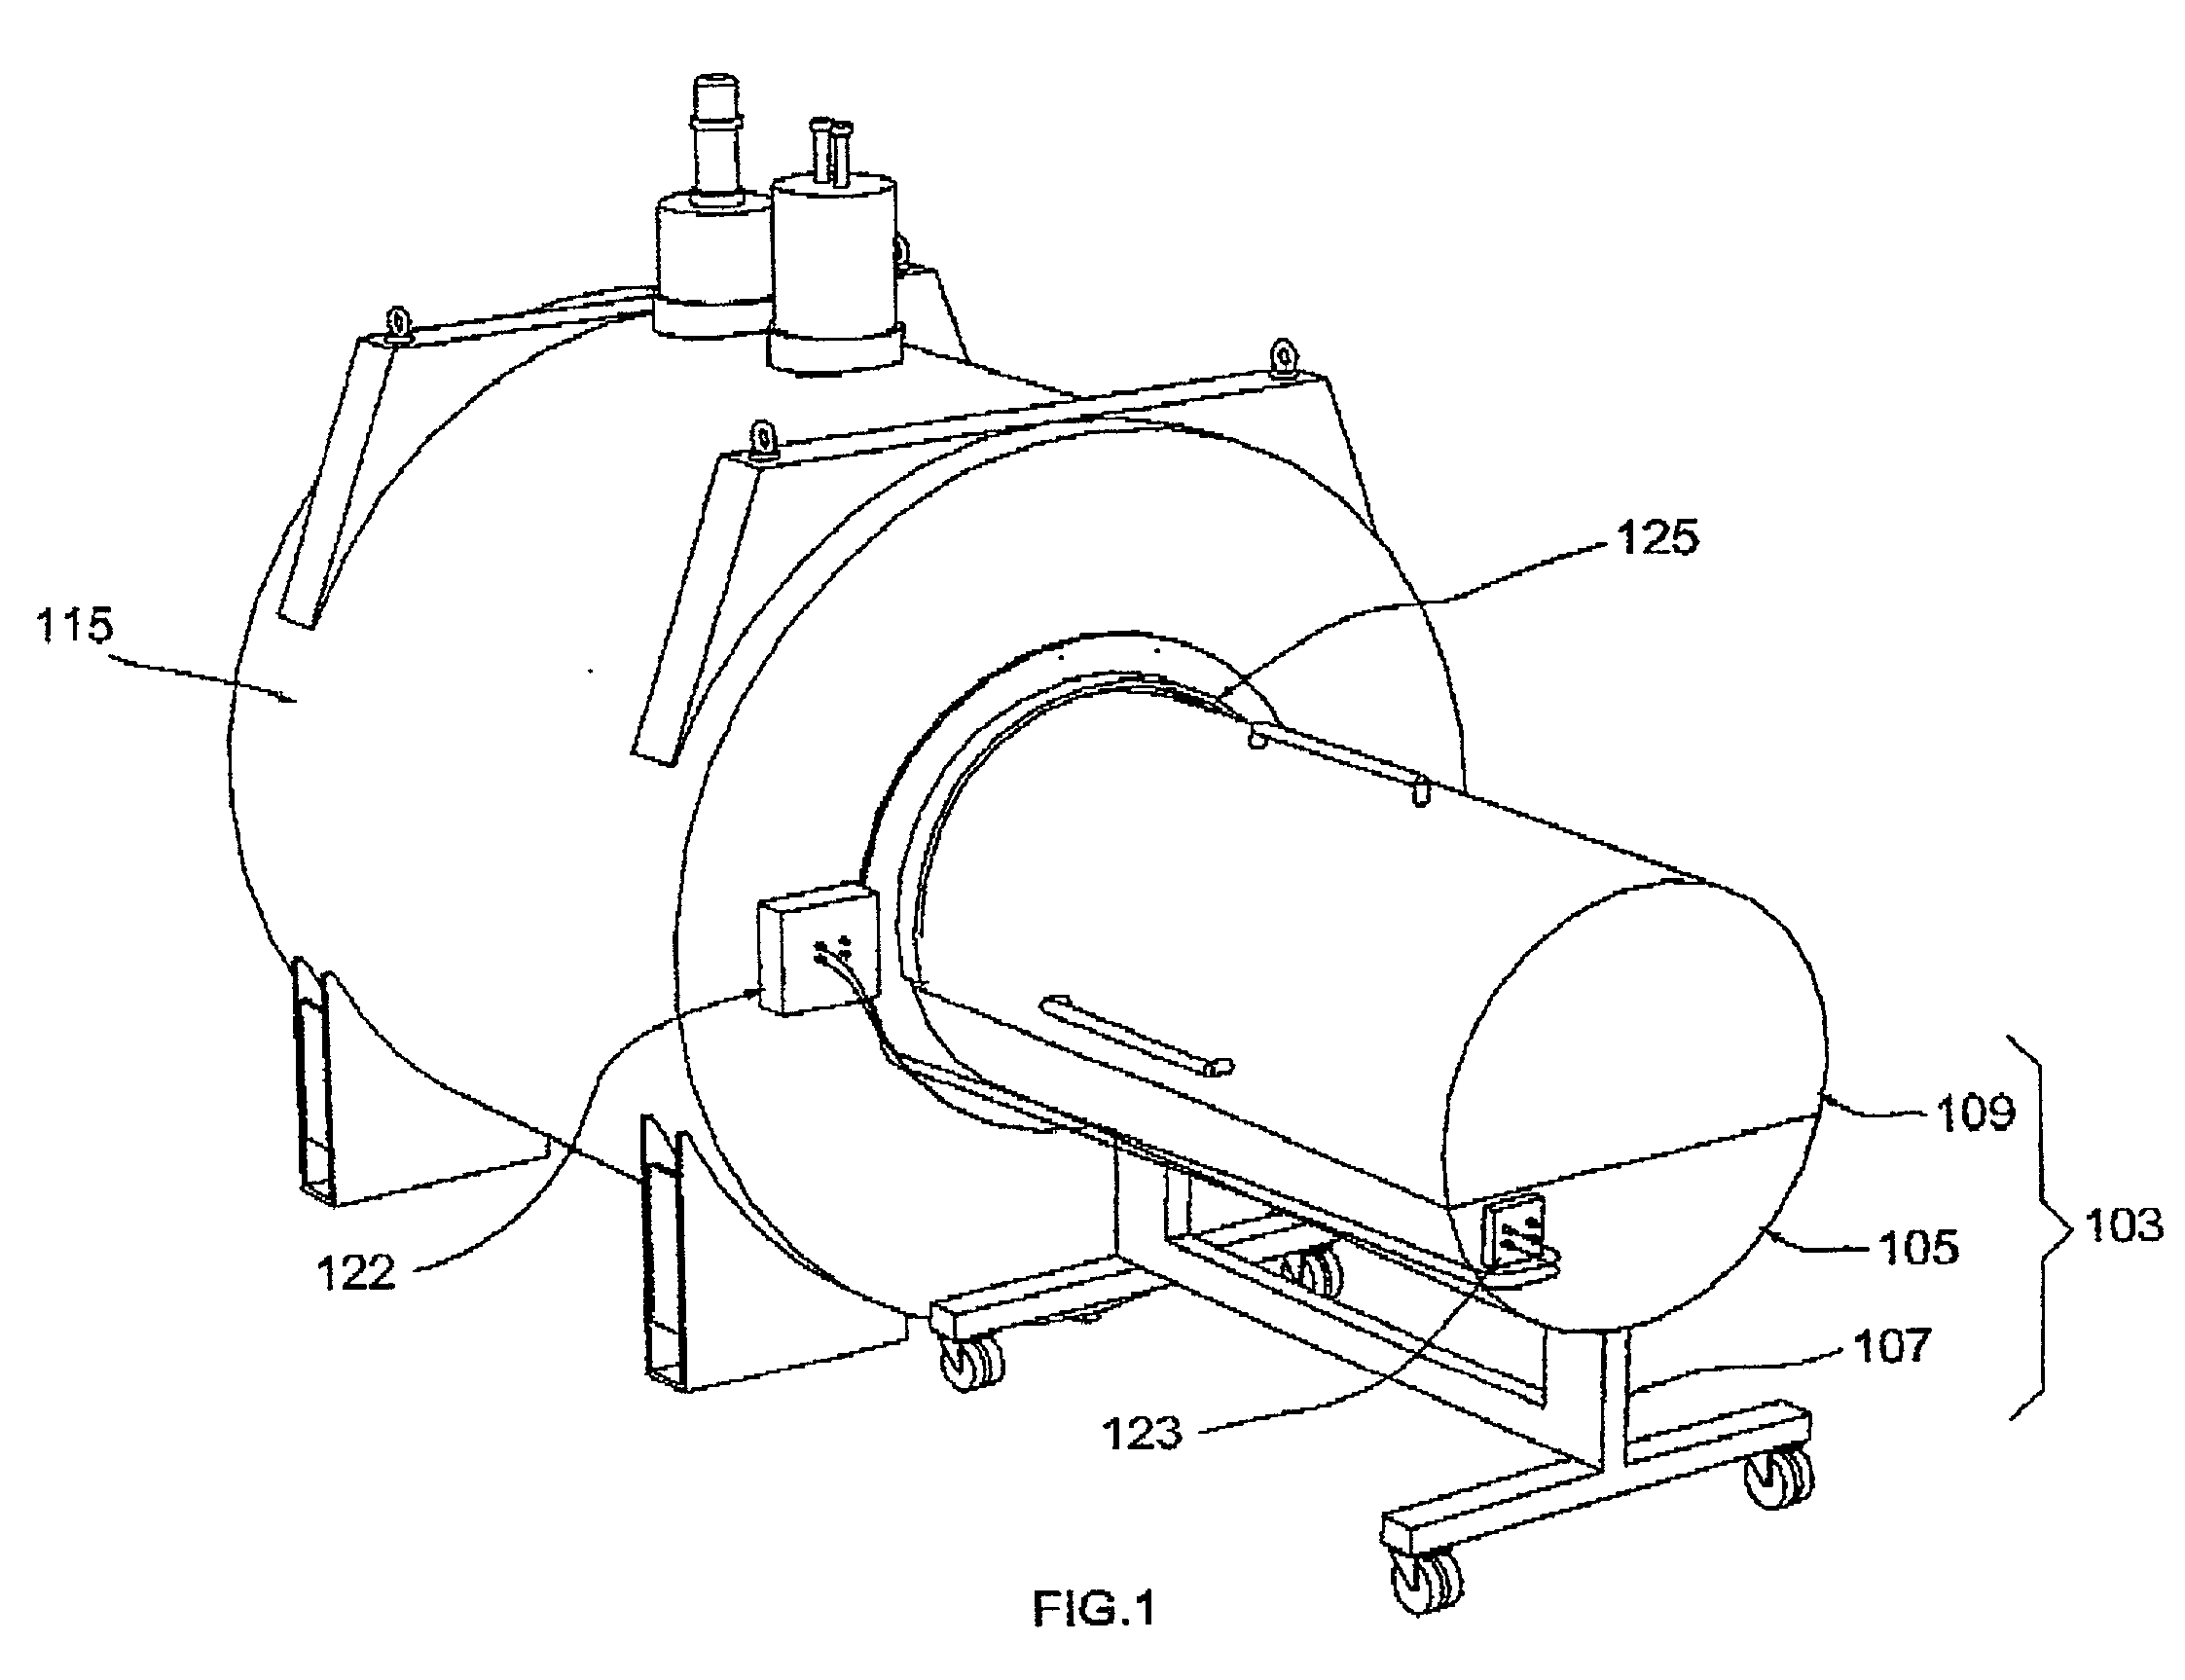 Radio frequency shield for nuclear magnetic resonance procedures